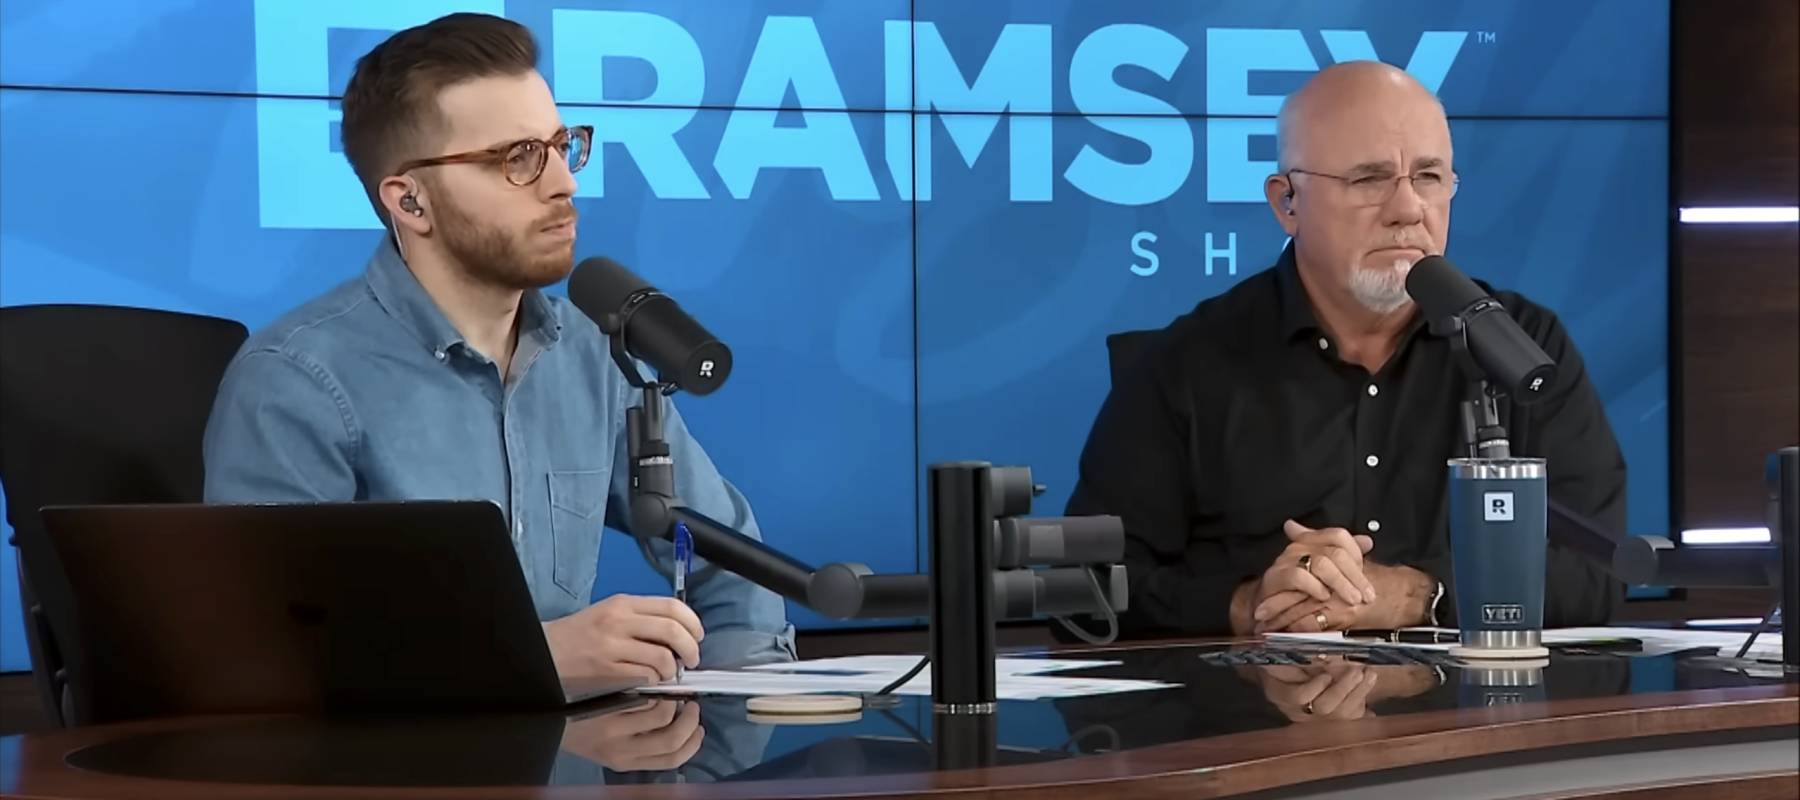 Radio host Dave Ramsey (right) and co-host George Kamel speak with Ashley on &quot;The Ramsey Show.&quot;